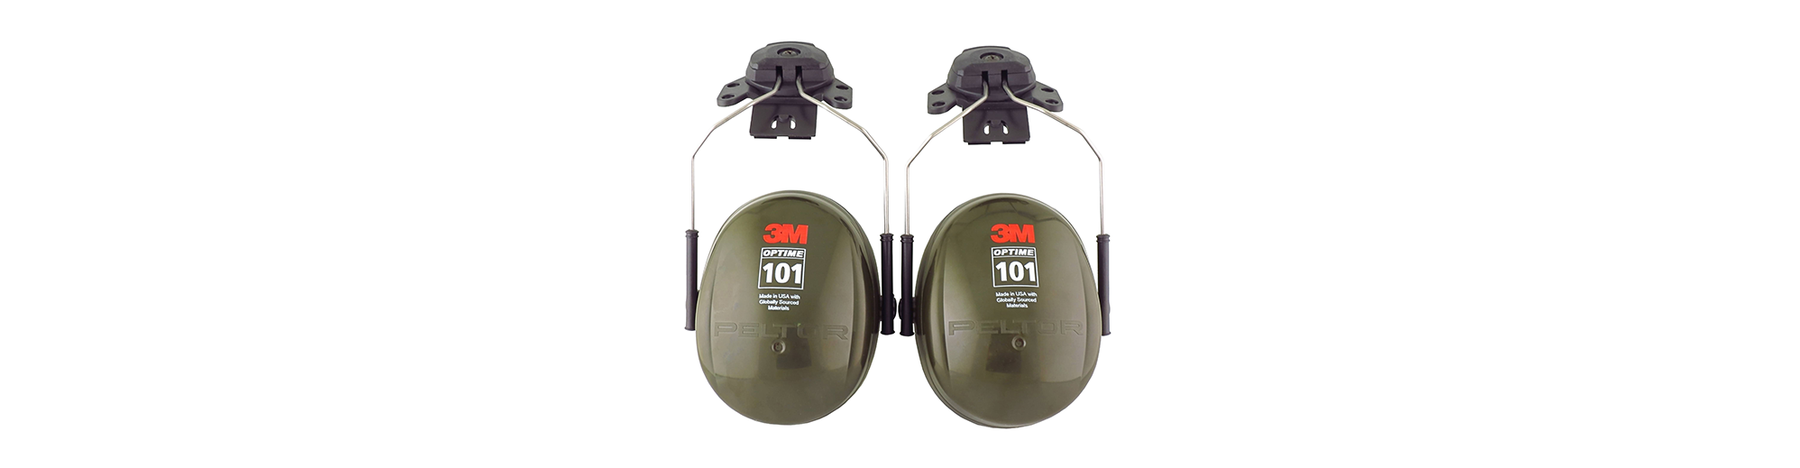 3M Peltor Hearing Protection